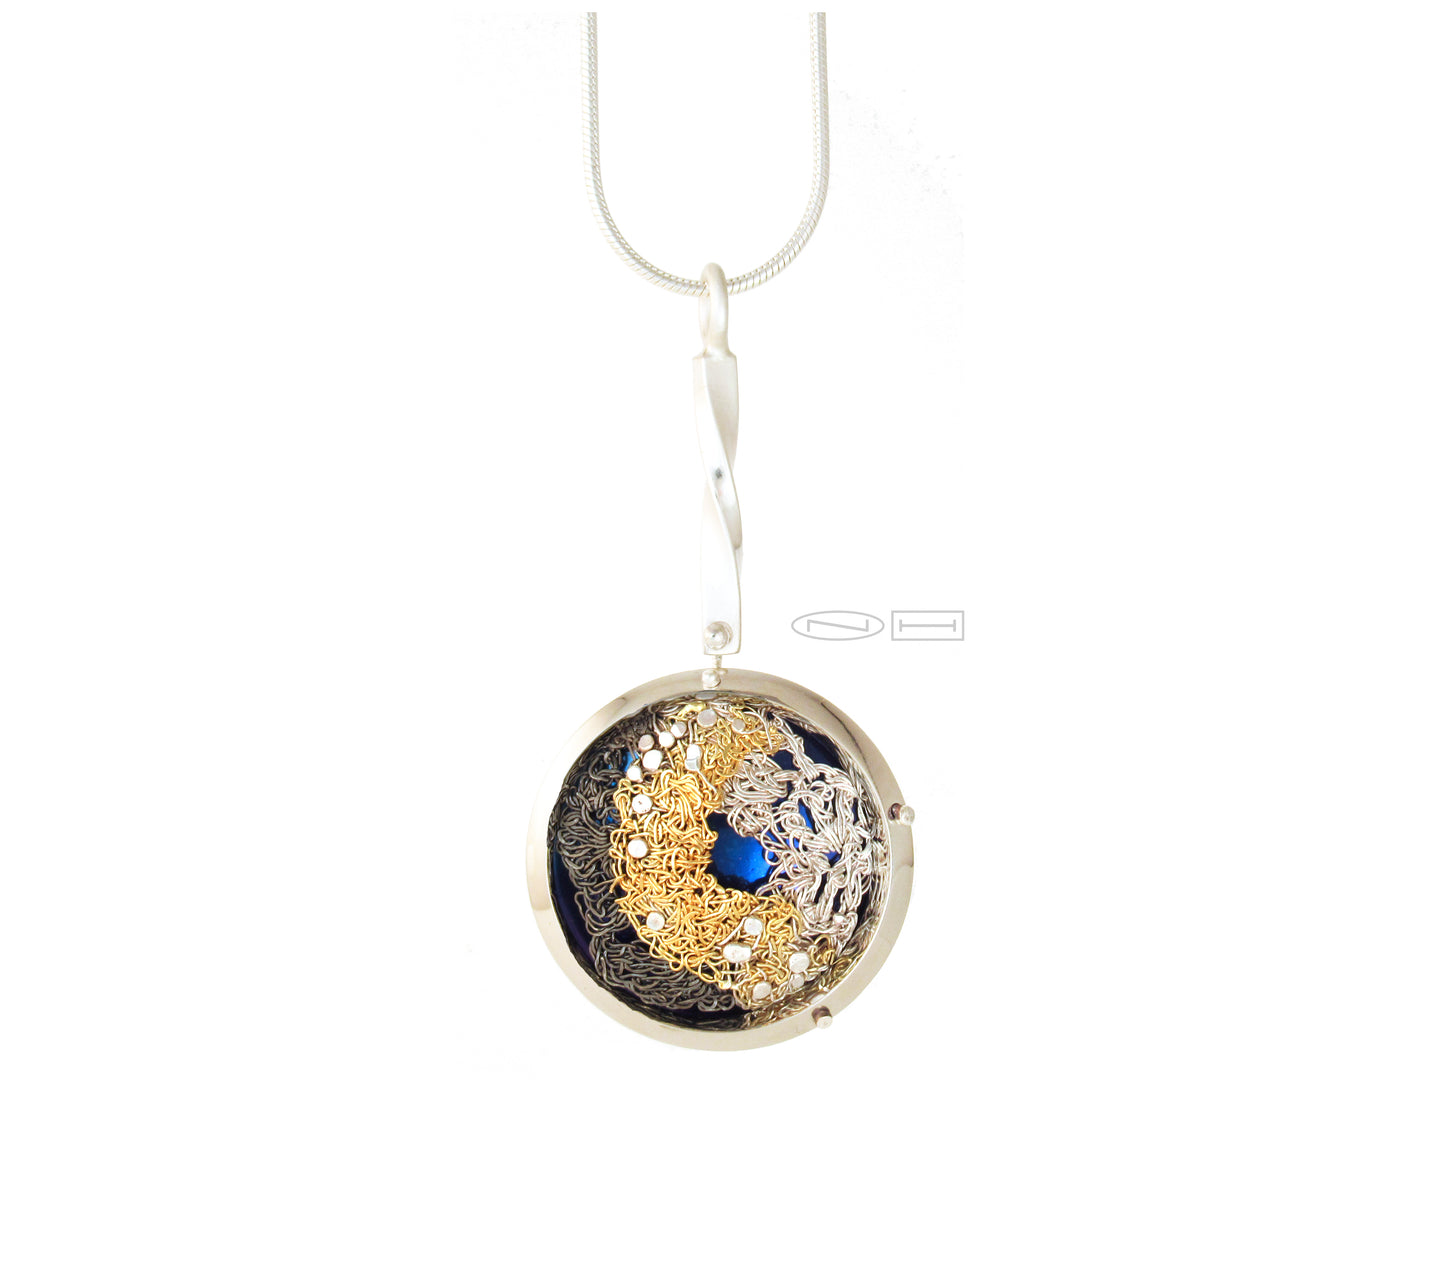 Handcrafted ~captured thought ~ 22kt yellow gold crochet, fine silver crochet, blacken crochet, stitched together, and placed upon an anodized titanium disc, framed in stainless steel, with sterling silver rivets, hanging from a twisted bail bar, with matte and high polish finish. Local Canadian handmade in Kingston, ON